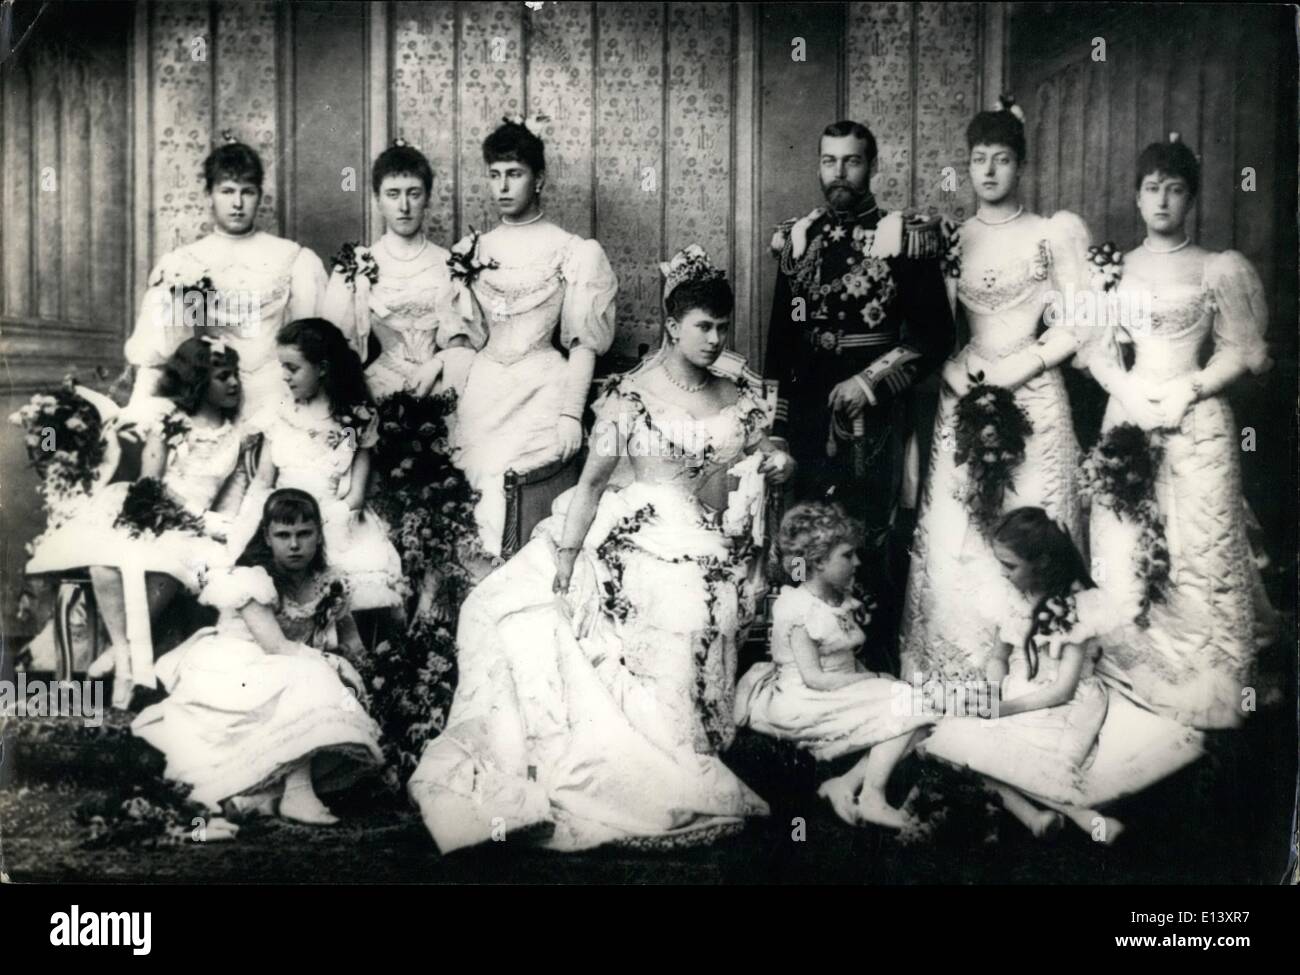 Mar. 27, 2012 - A flashback in the 90's Prince George's Wedding to Mary 1893; Back row left to right Princess Alexandra of Edinburg, Princess Victoria of Schleawig Holstein, Princess Victoria of Edinburg, Prince George (later King George V) Princess Victoria of Wales, and Princess Maud of Wales, (Later, Queen Maud of Norway). Second row , Princess Alice of Battenburg, Princess Margaret of Connaught, Princess may (the bride) of tech, front row Princess Beatrice of Edinburgh, Princess Victoria of Battenburgh, and Princess Victoria Patricia of Coannaught. Stock Photo